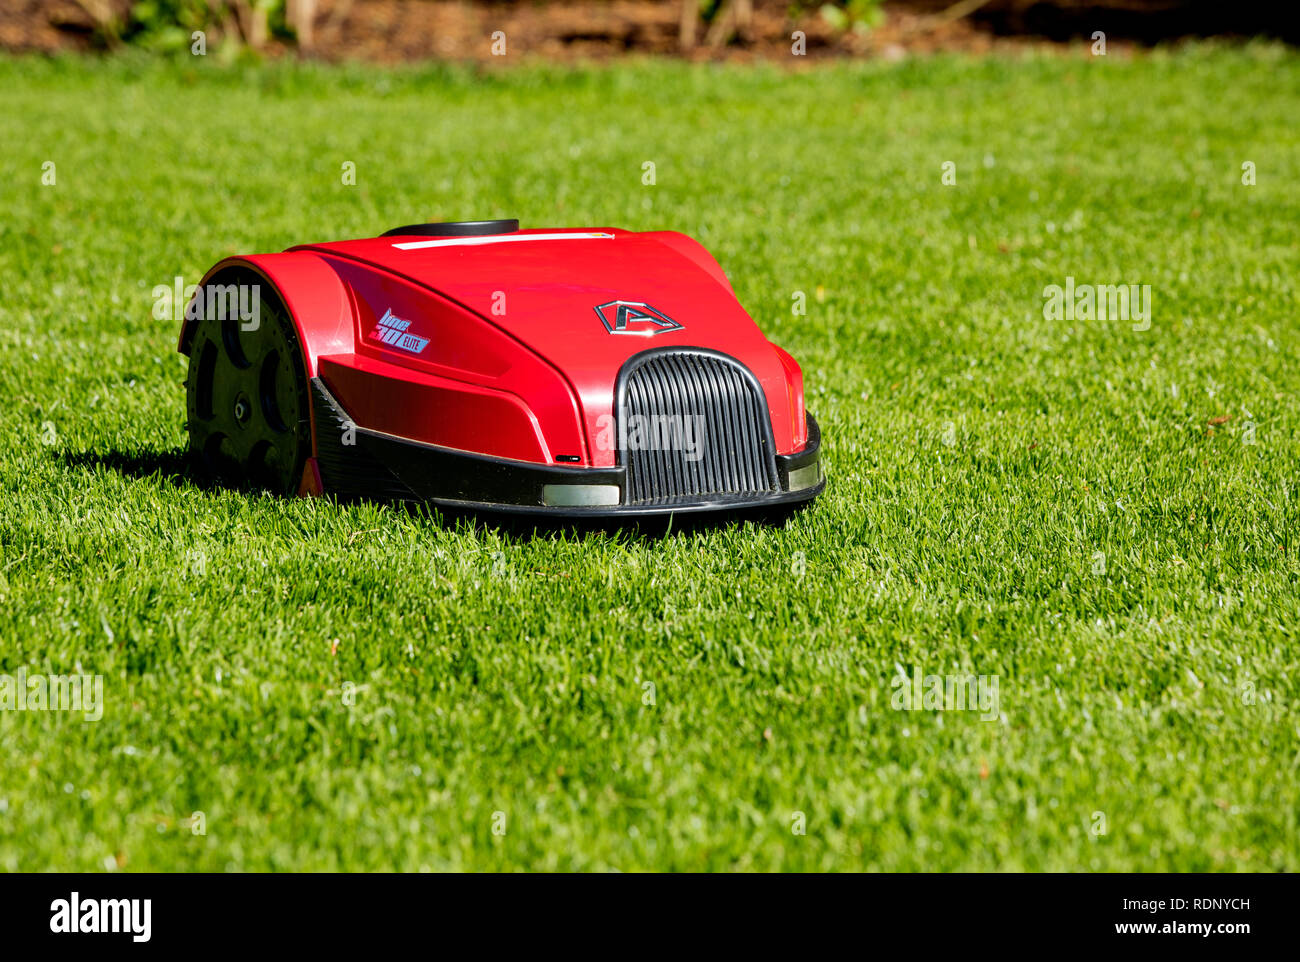 Electric lawn mower Stock Photo